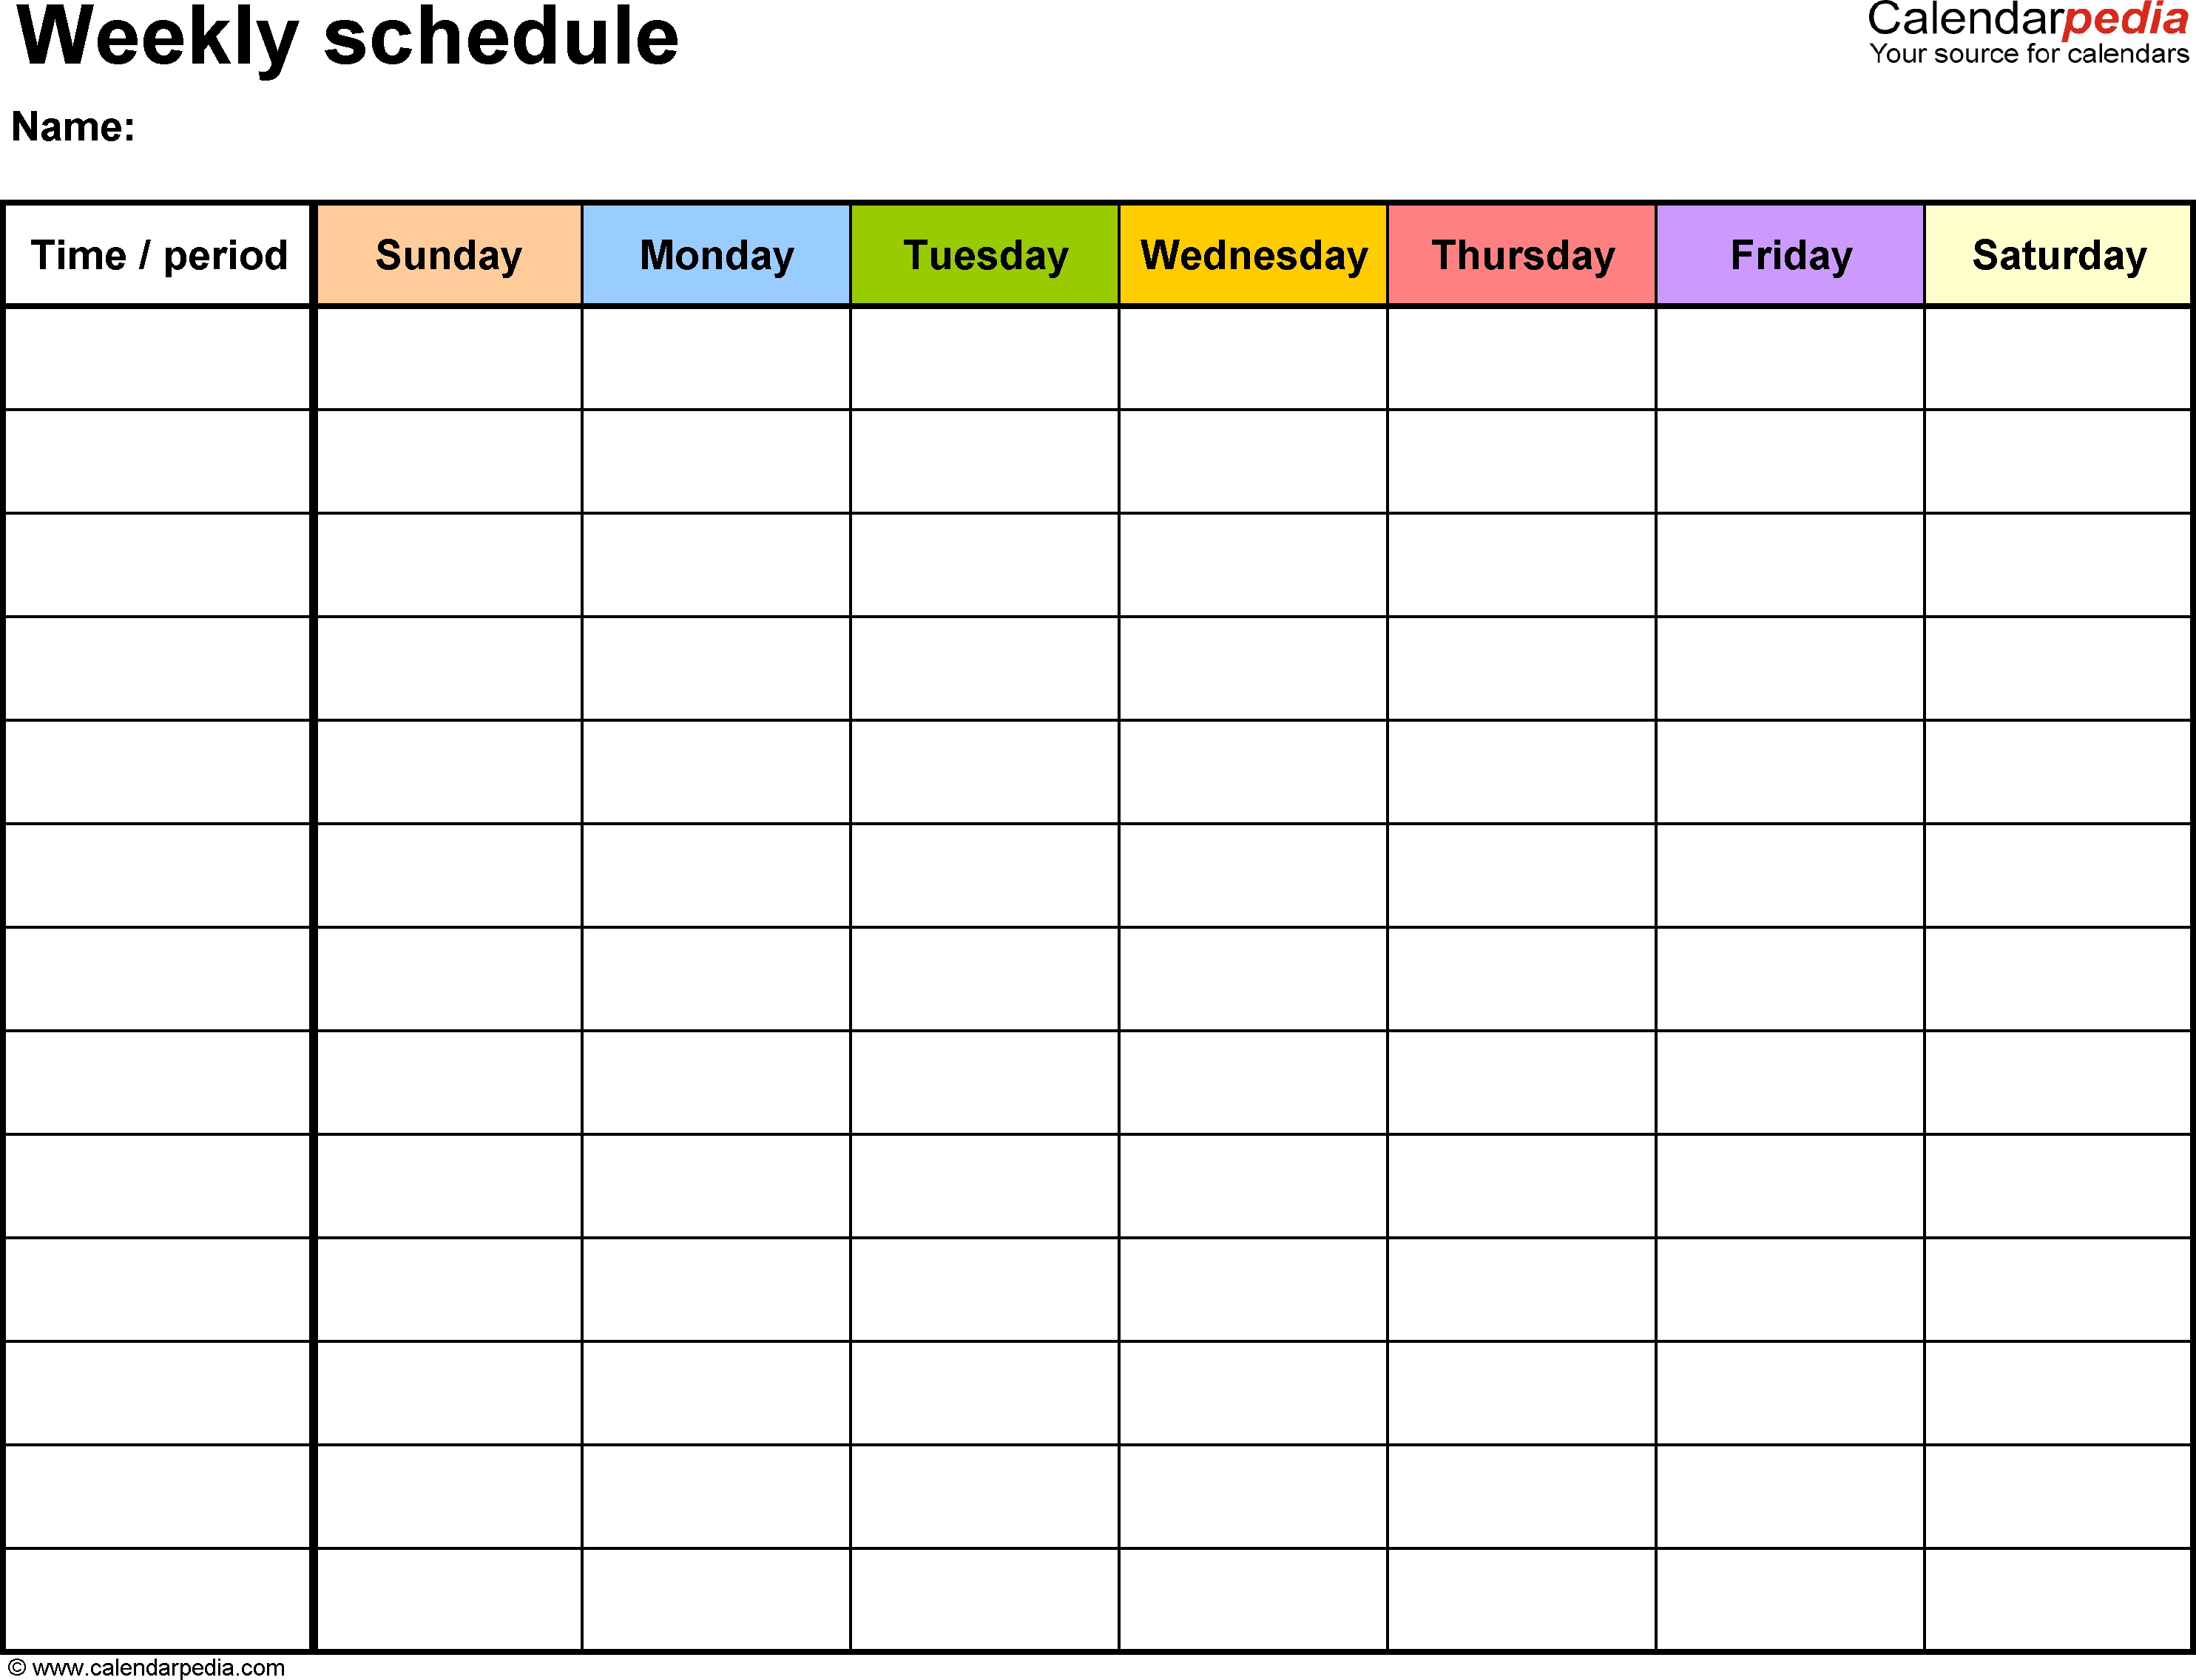 Free Weekly Schedule Templates For Excel - 18 Templates  Printable Time Of Day Calendar